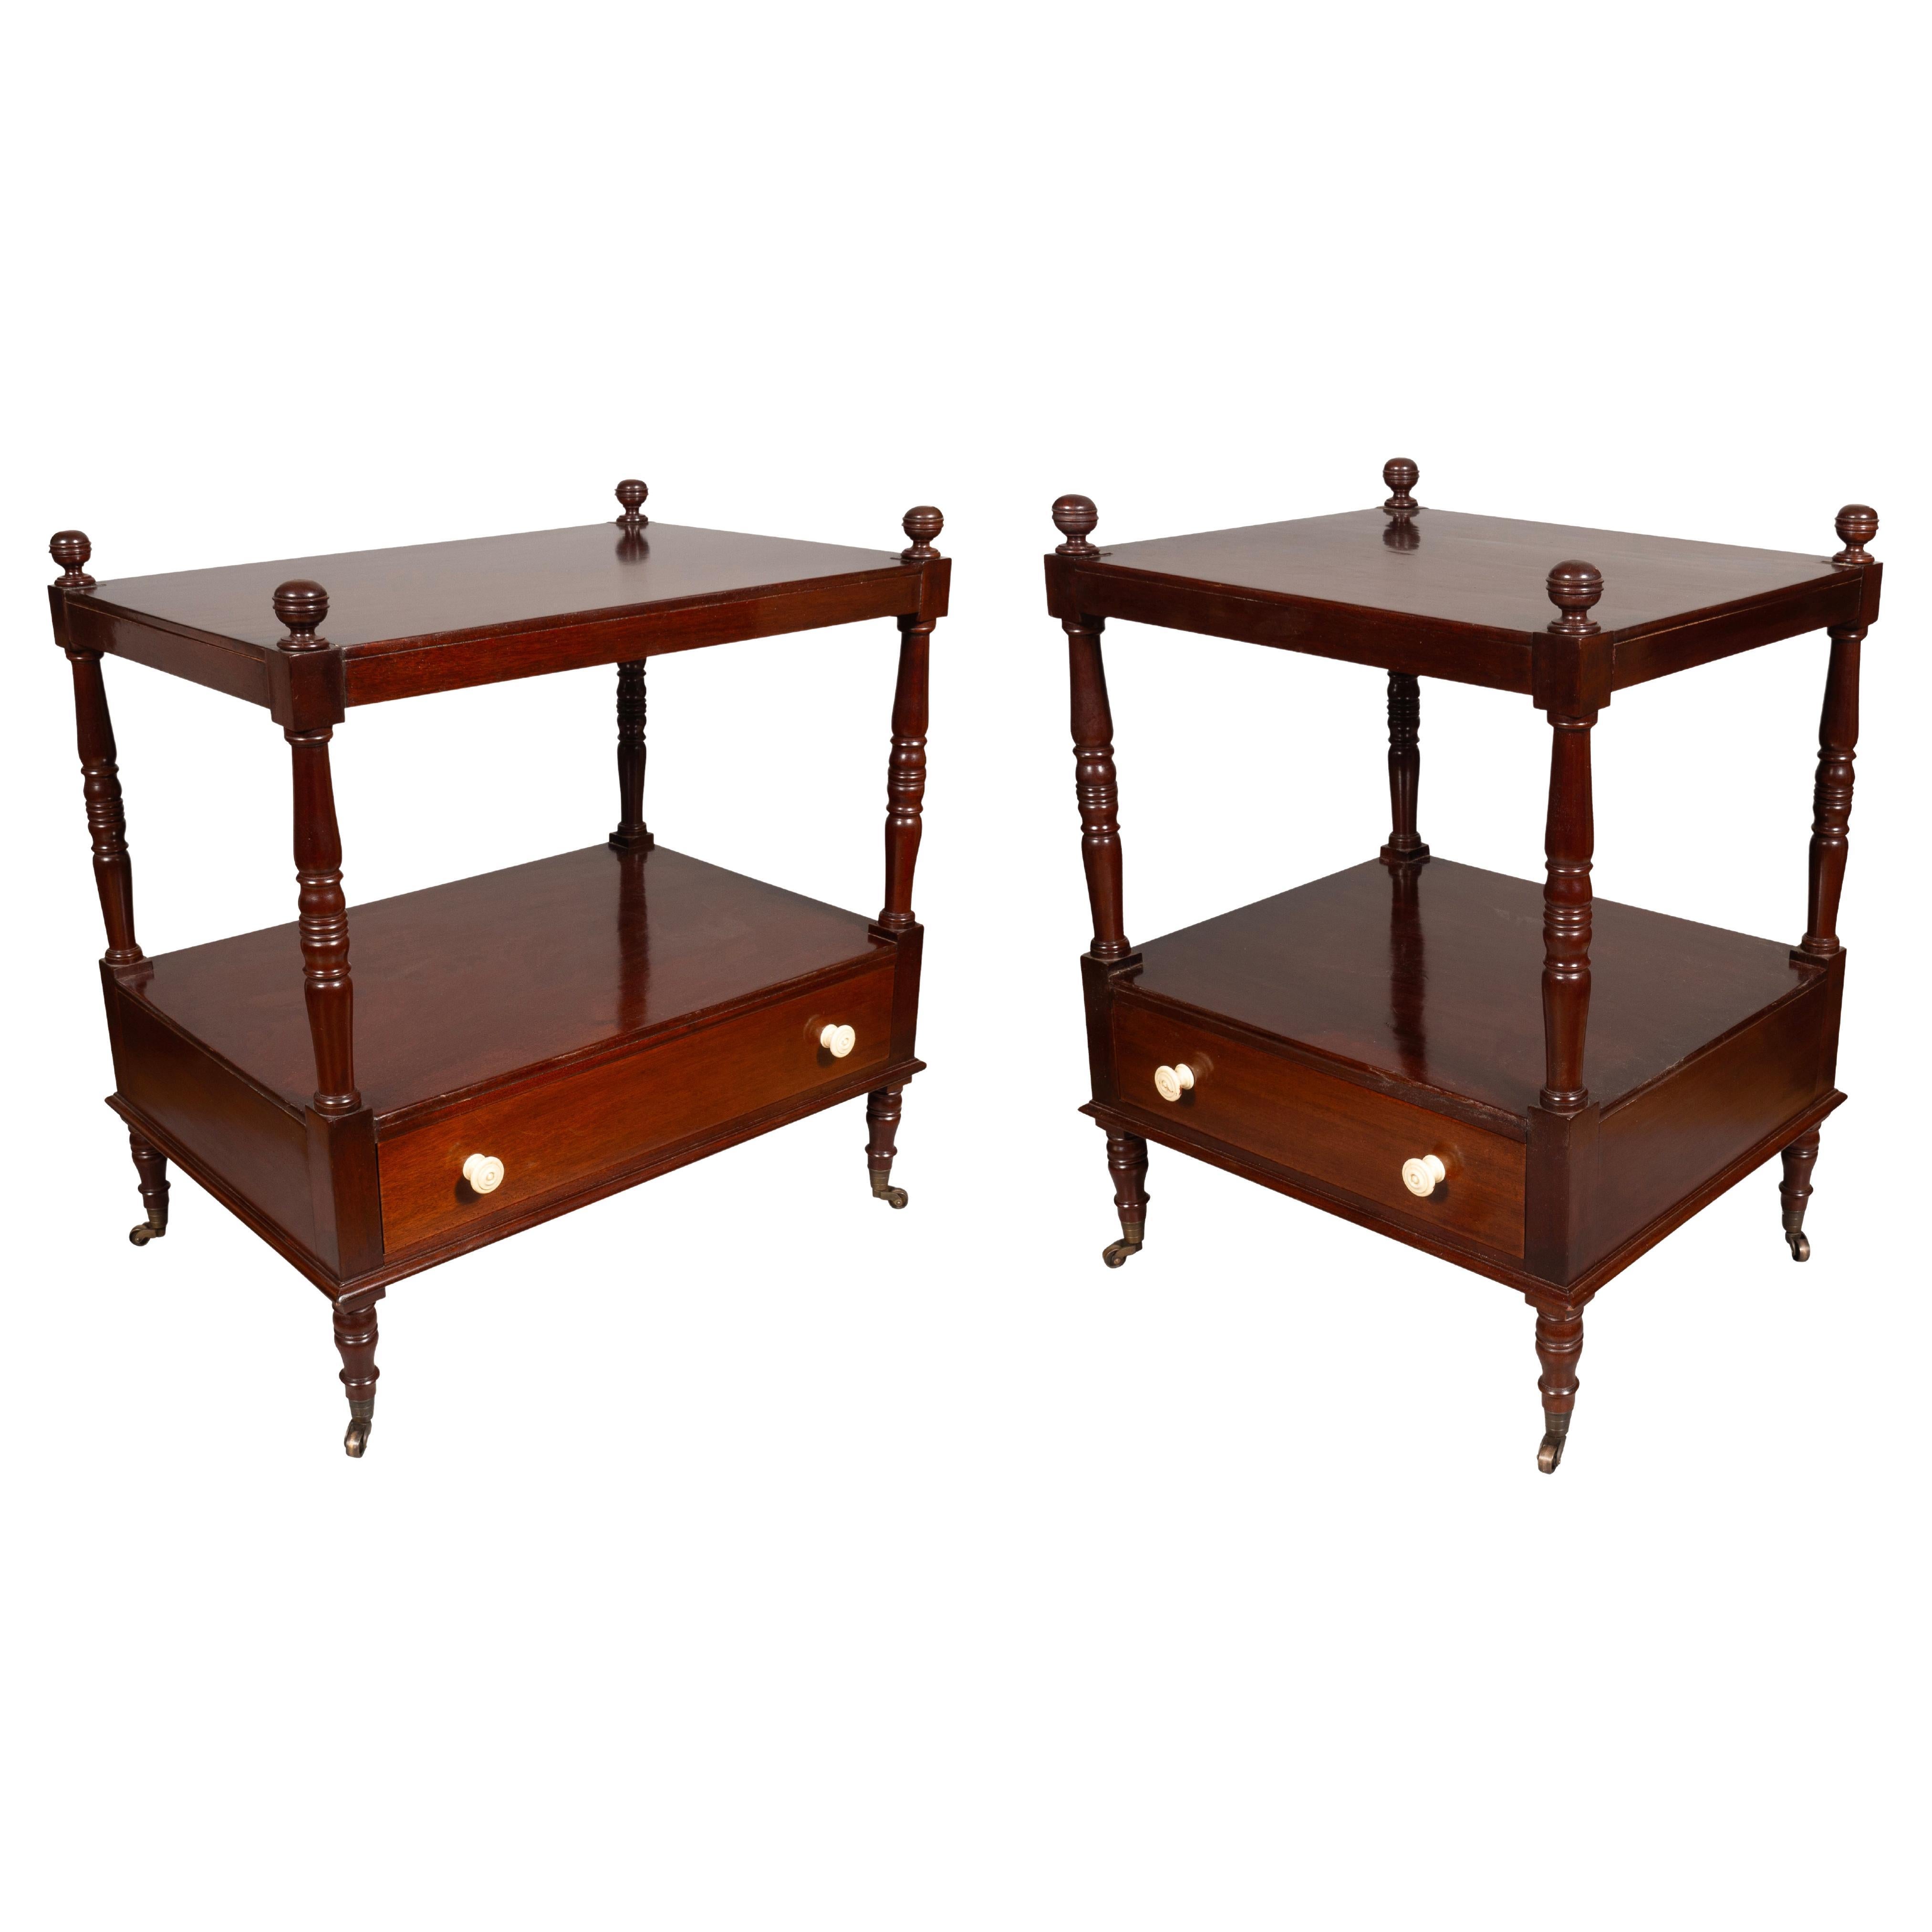 Matched Pair Of Regency Style Mahogany End Tables For Sale